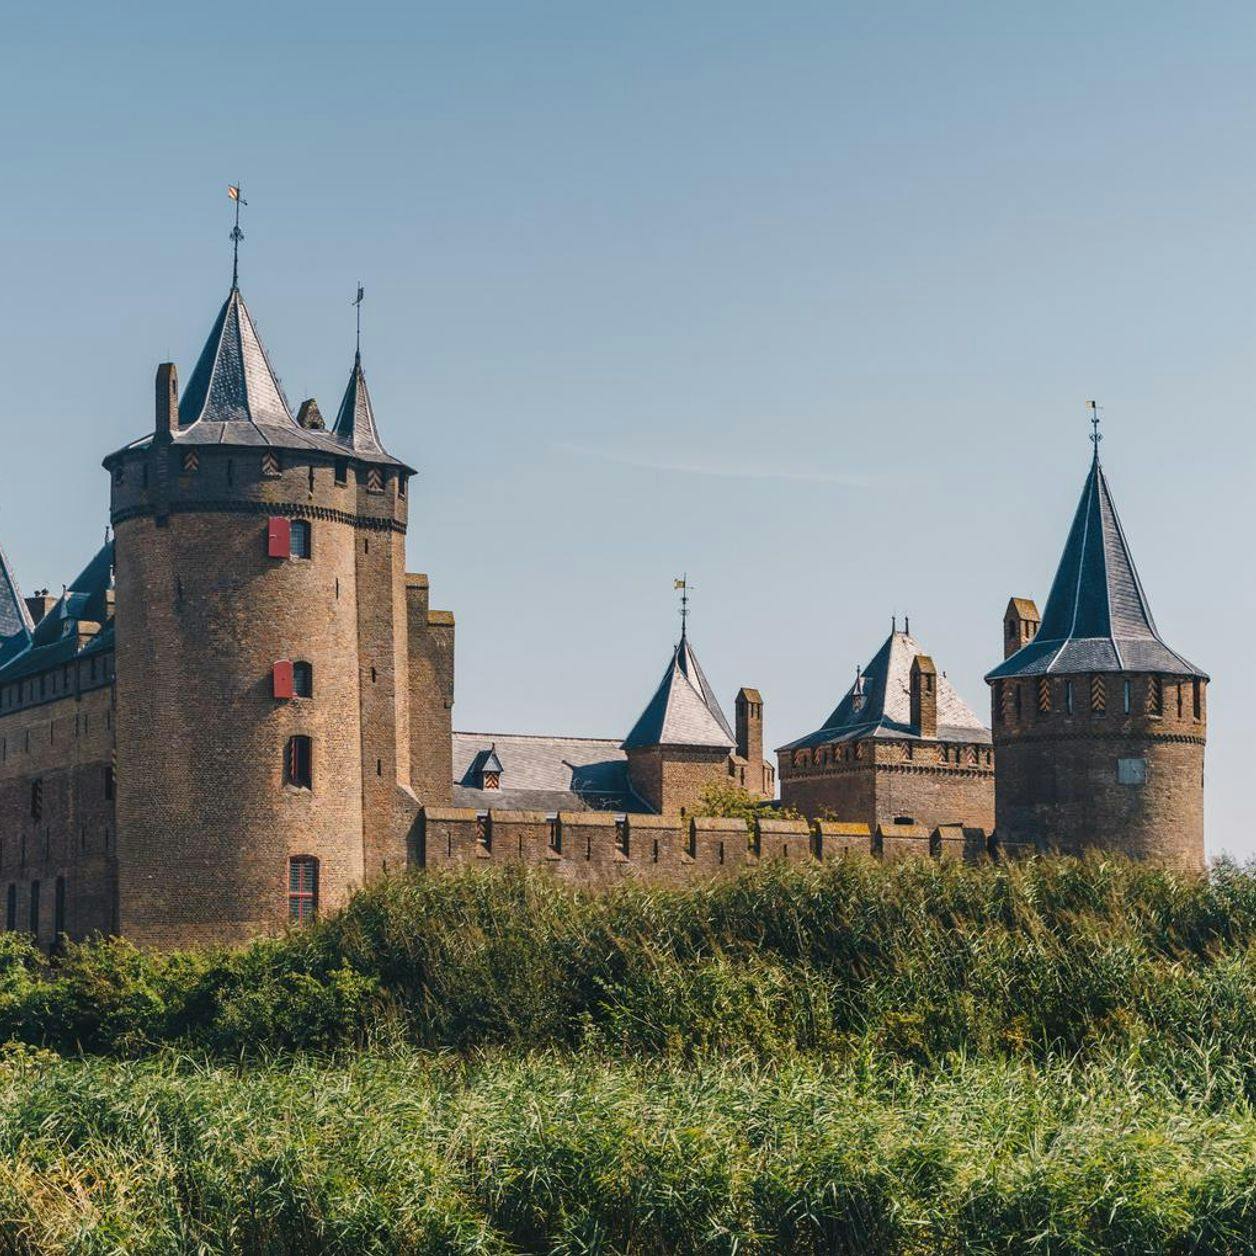 The Muiderslot is a medieval castle in the North Holland town of Muiden, built around 1285, restored to its former glory from 1370 and a national museum since 1878.